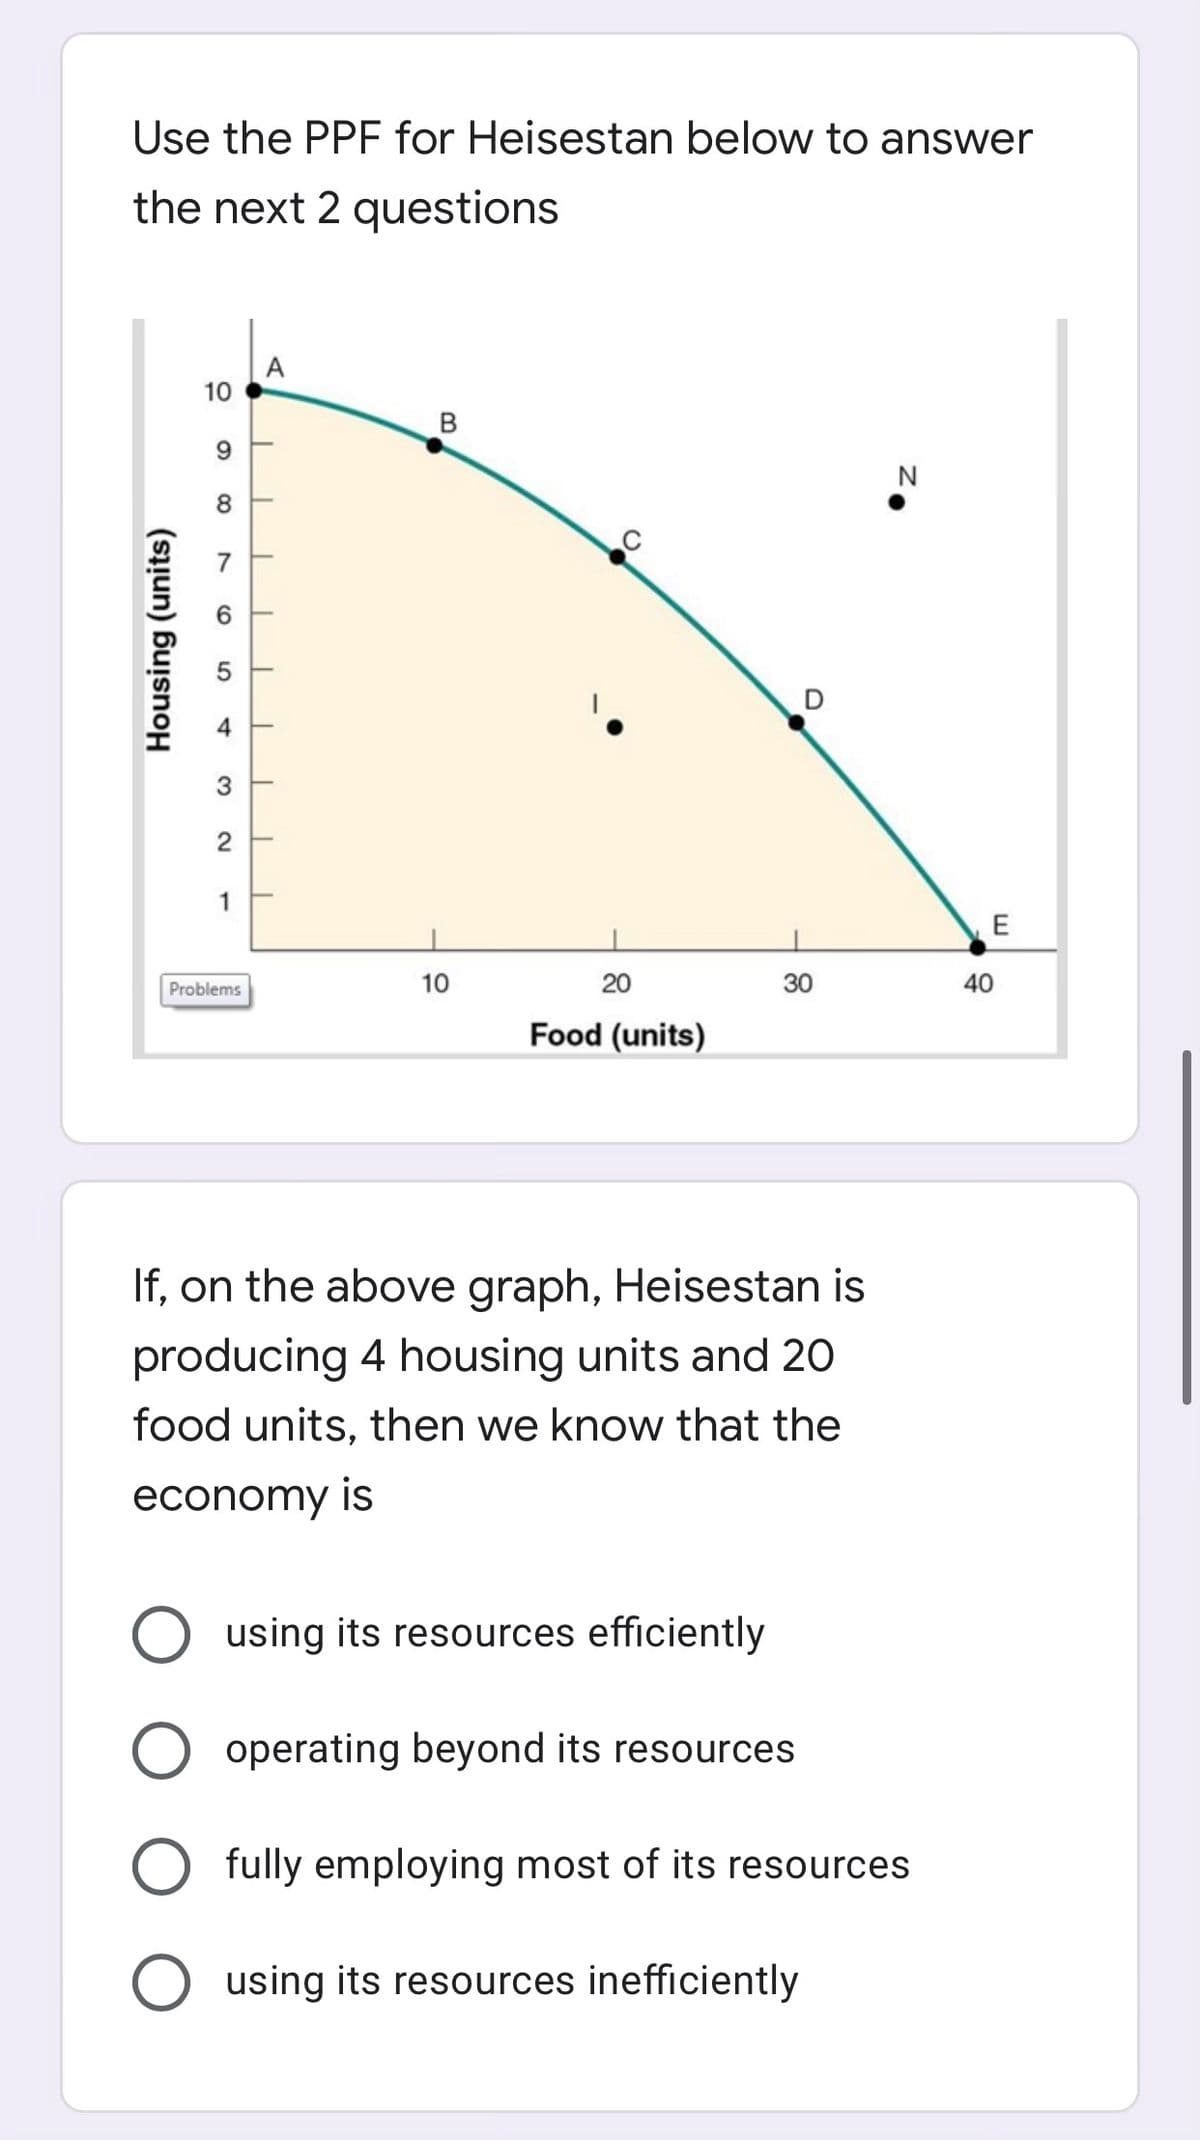 Use the PPF for Heisestan below to answer
the next 2 questions
A
10
9.
N
8
7
D
2
1
E
Problems
10
20
30
40
Food (units)
If, on the above graph, Heisestan is
producing 4 housing units and 20
food units, then we know that the
economy is
using its resources efficiently
operating beyond its resources
O fully employing most of its resources
using its resources inefficiently
Housing (units)
4,
